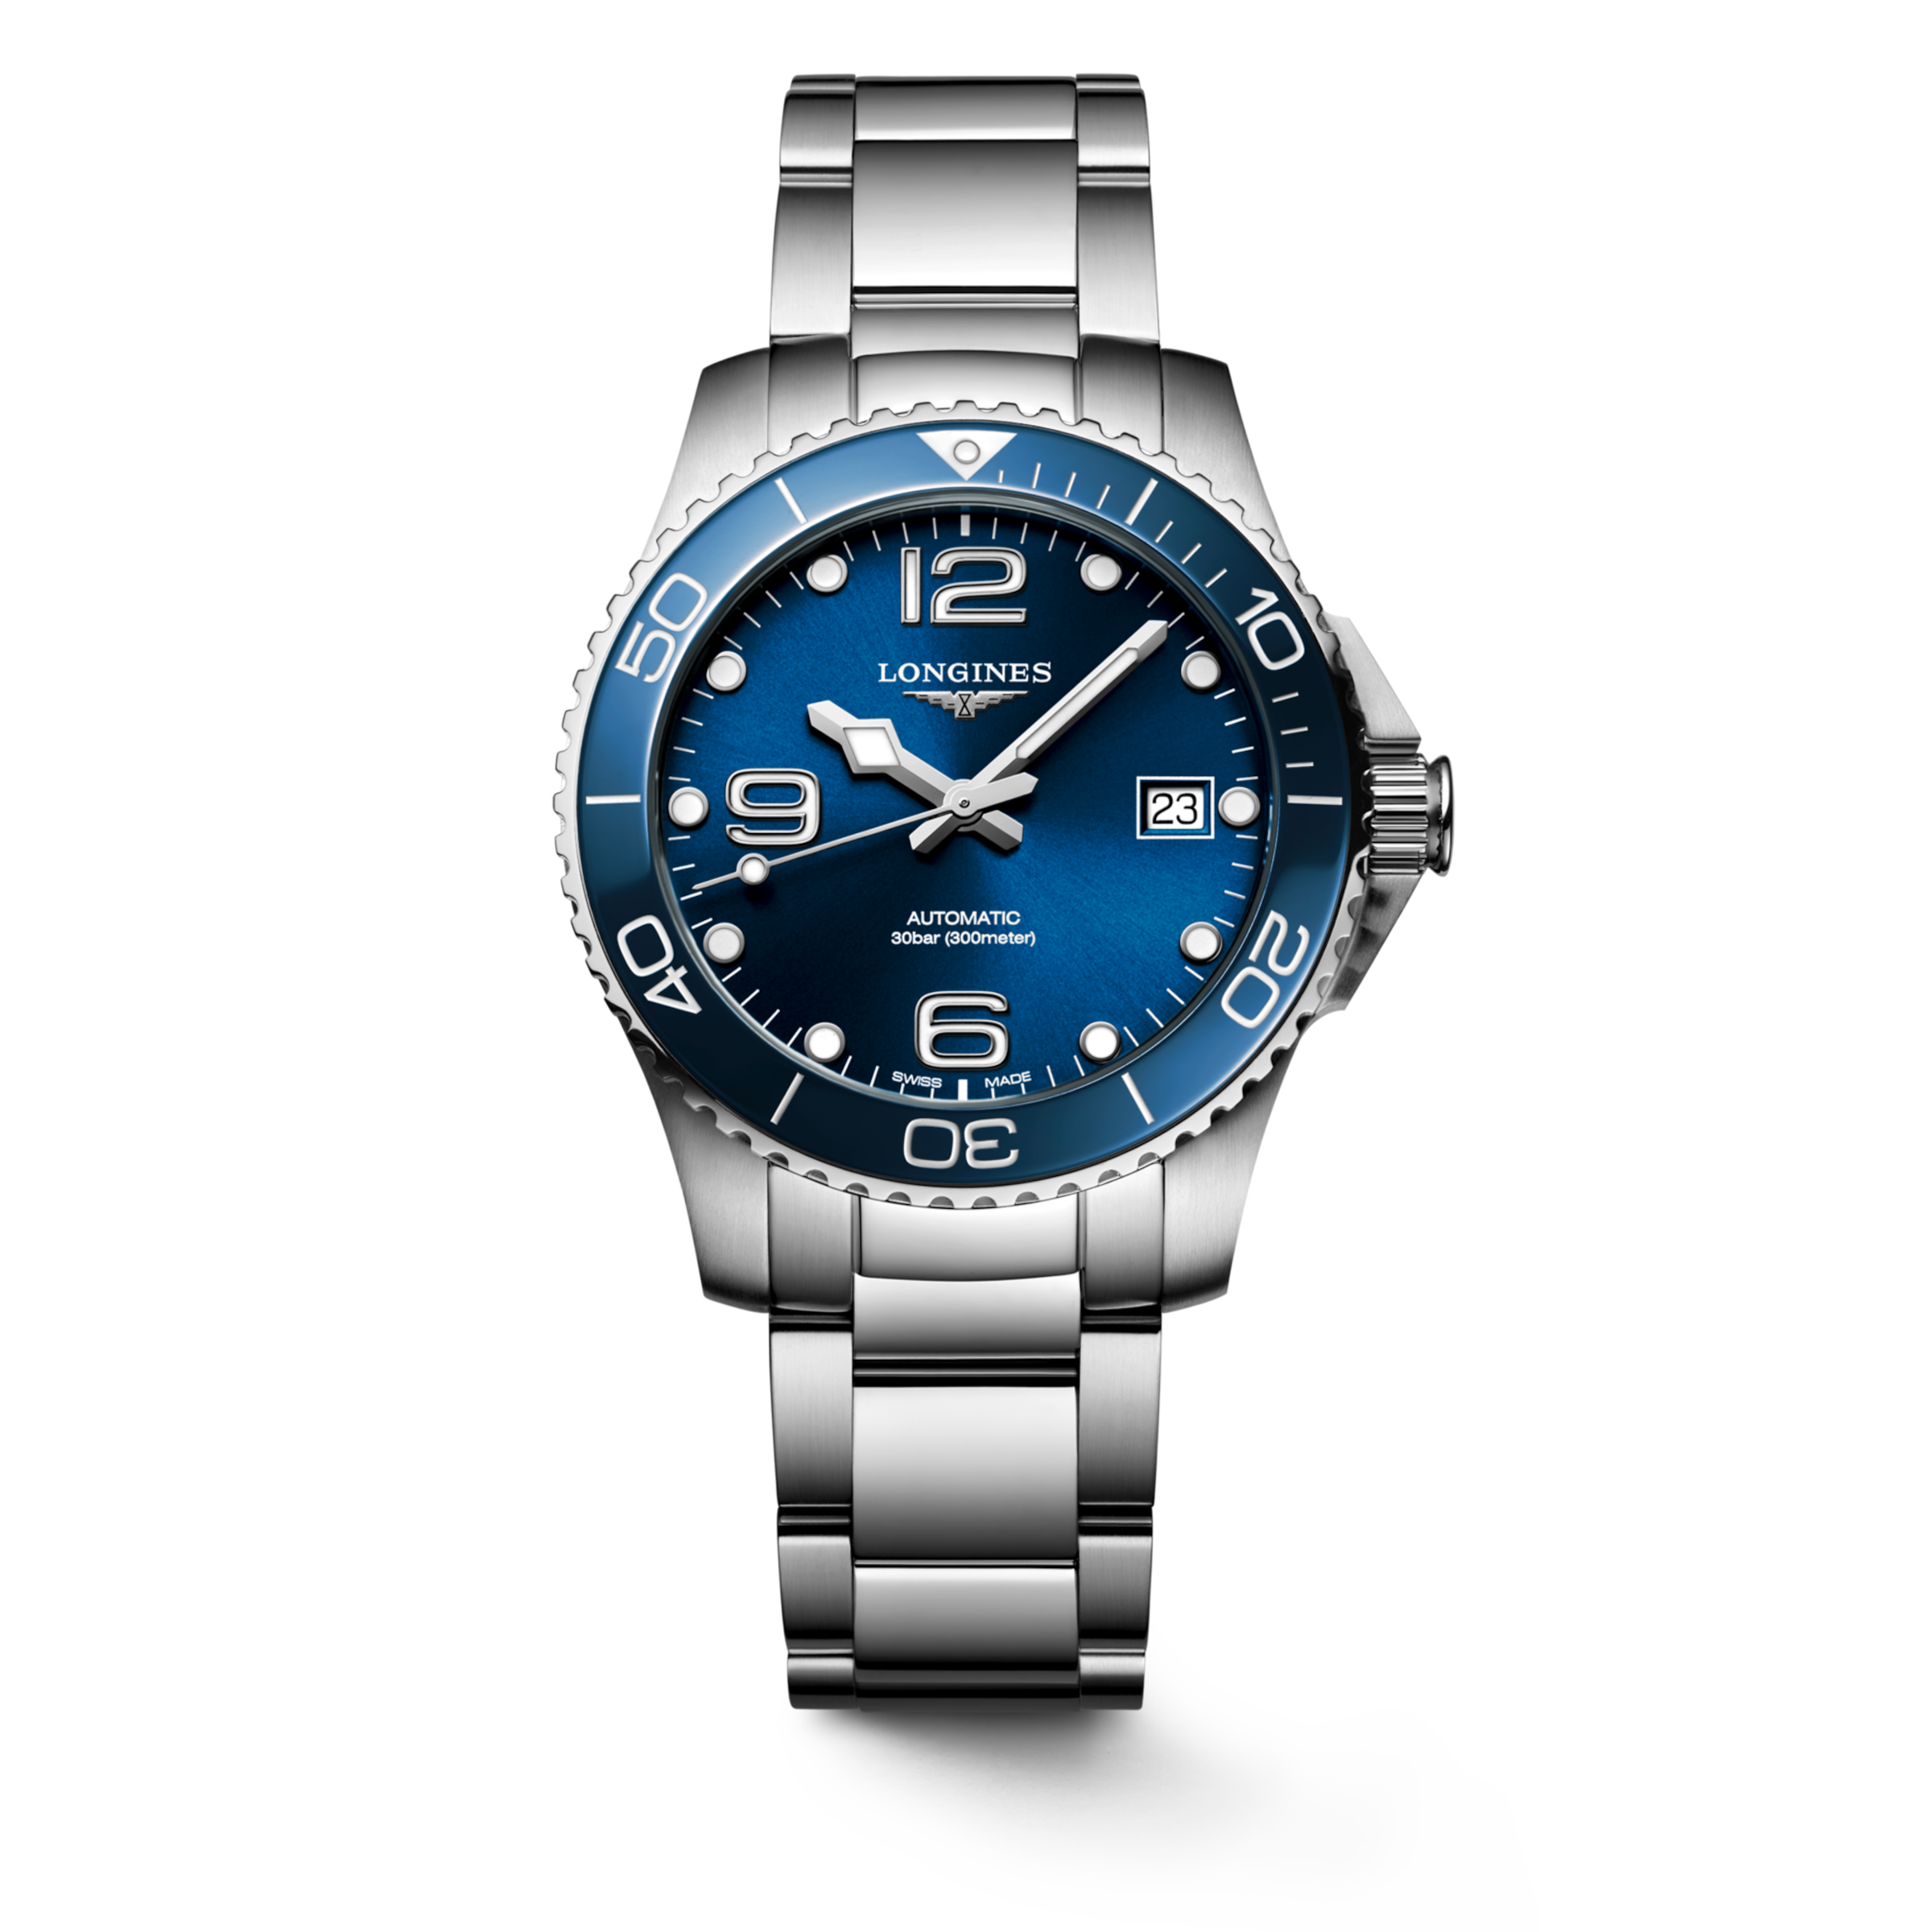 Longines HYDROCONQUEST Automatic Stainless steel and ceramic bezel Watch - L3.780.4.96.6